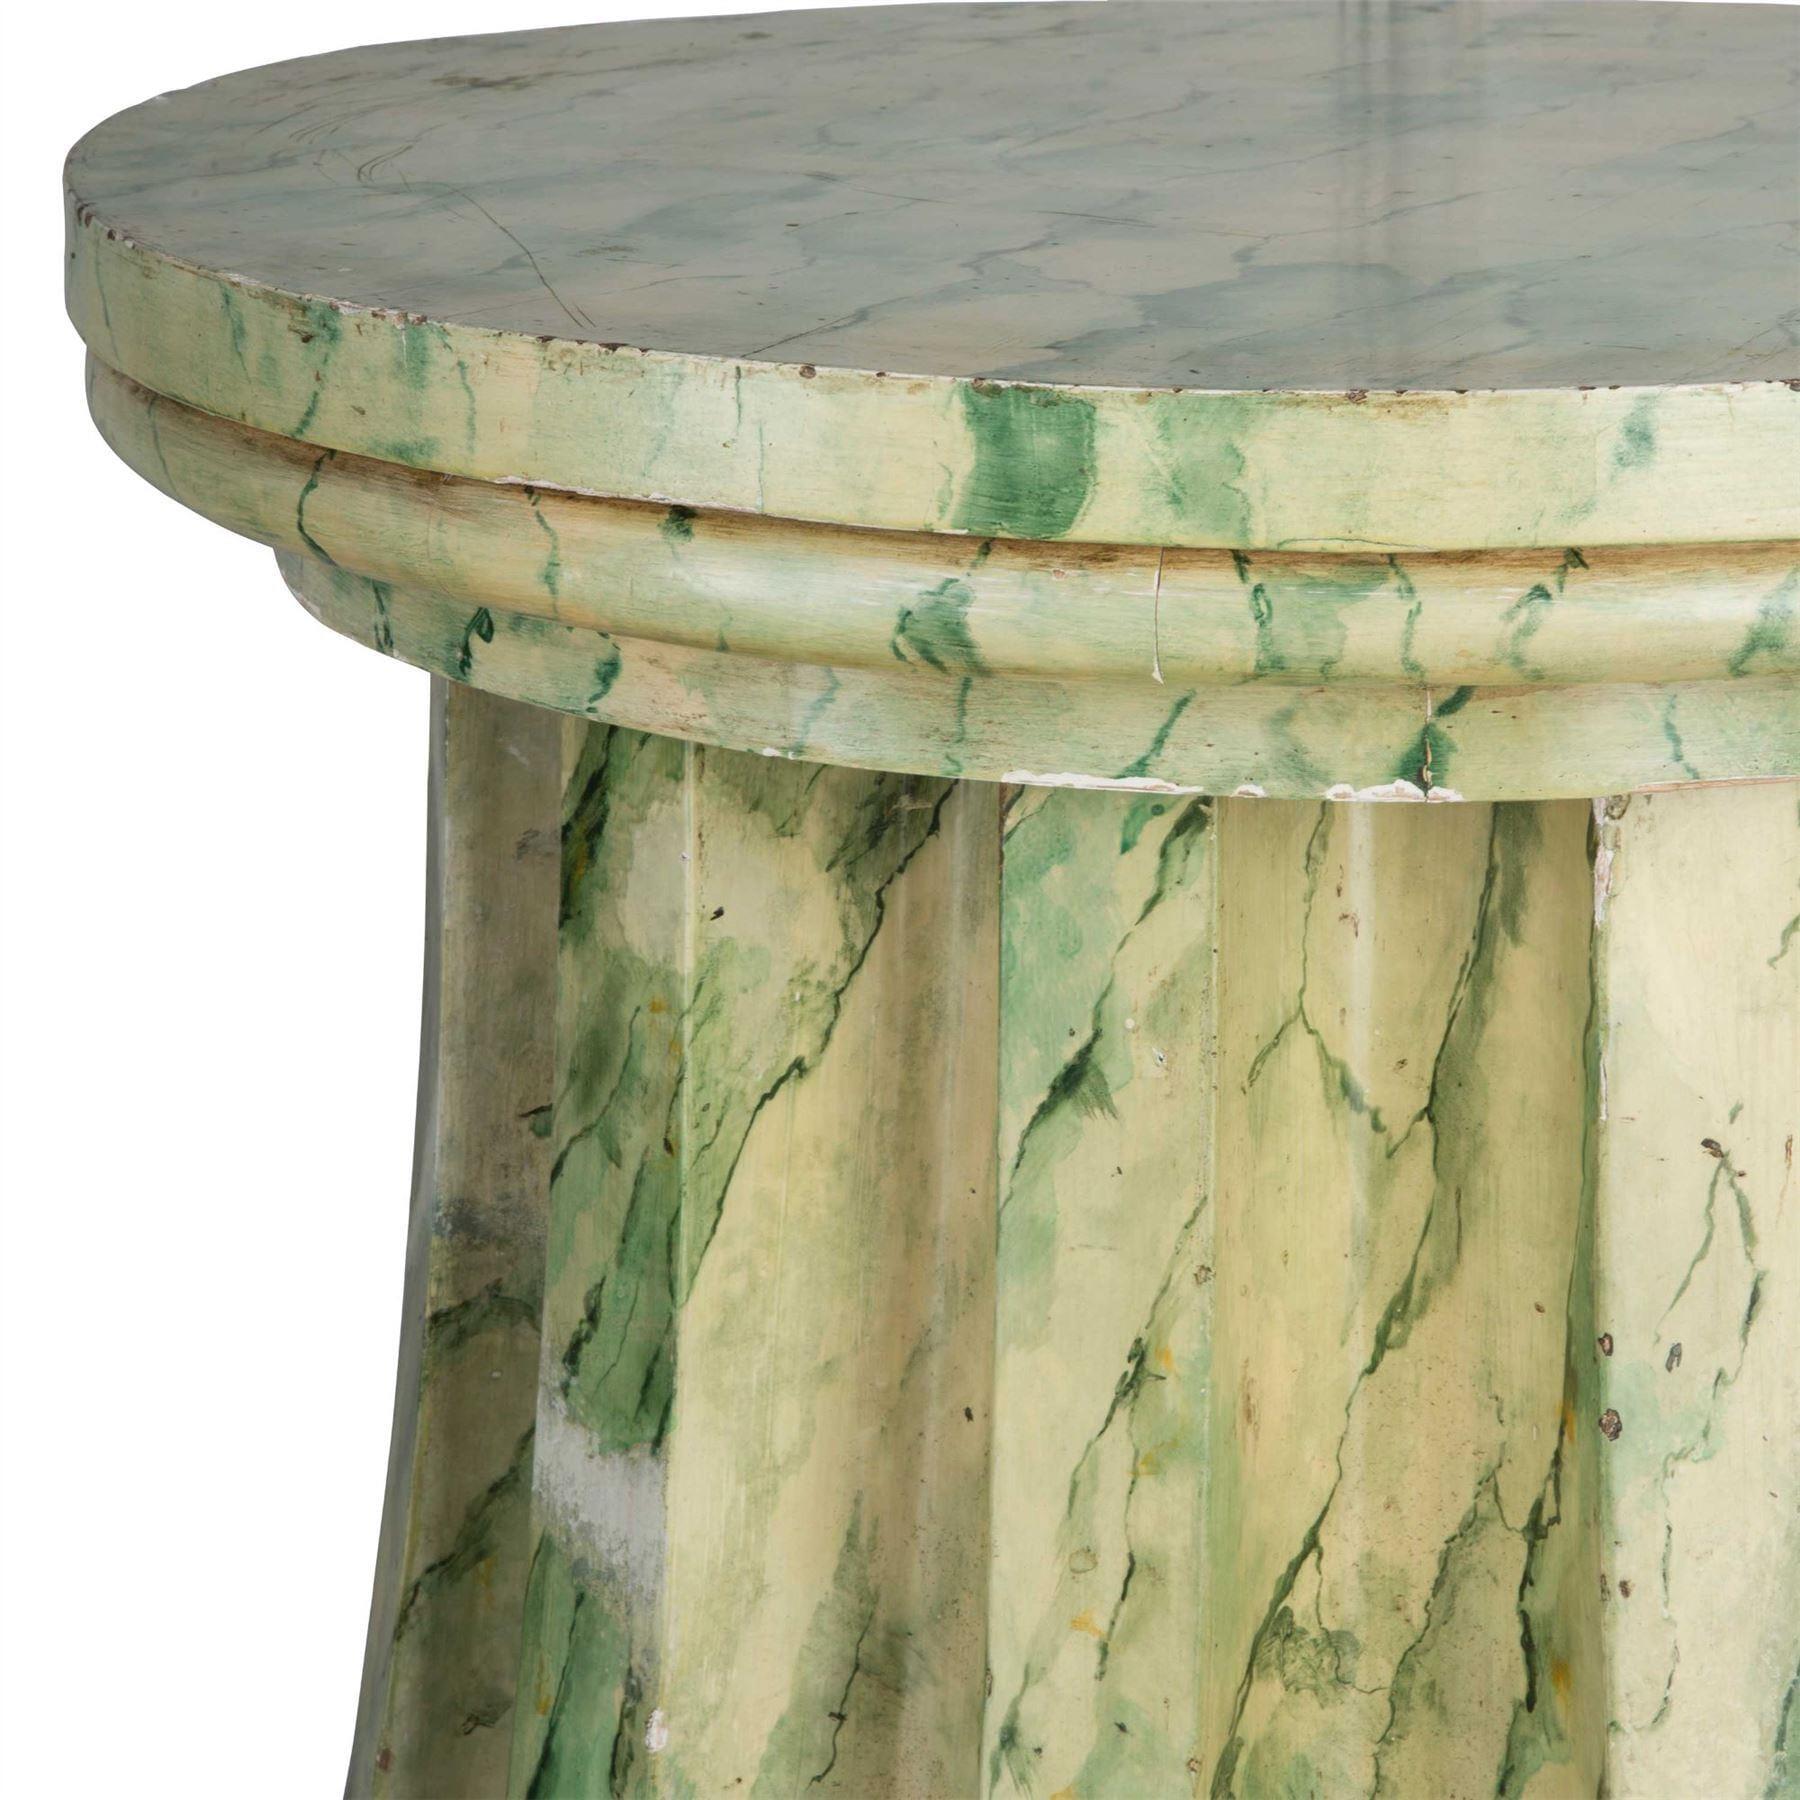 C19th simulated marble pedestal of massive proportions, the circular moulded top above an exagerated fluted trumpet shaped body, raised on a stepped plinth. English. 1830.

37.5